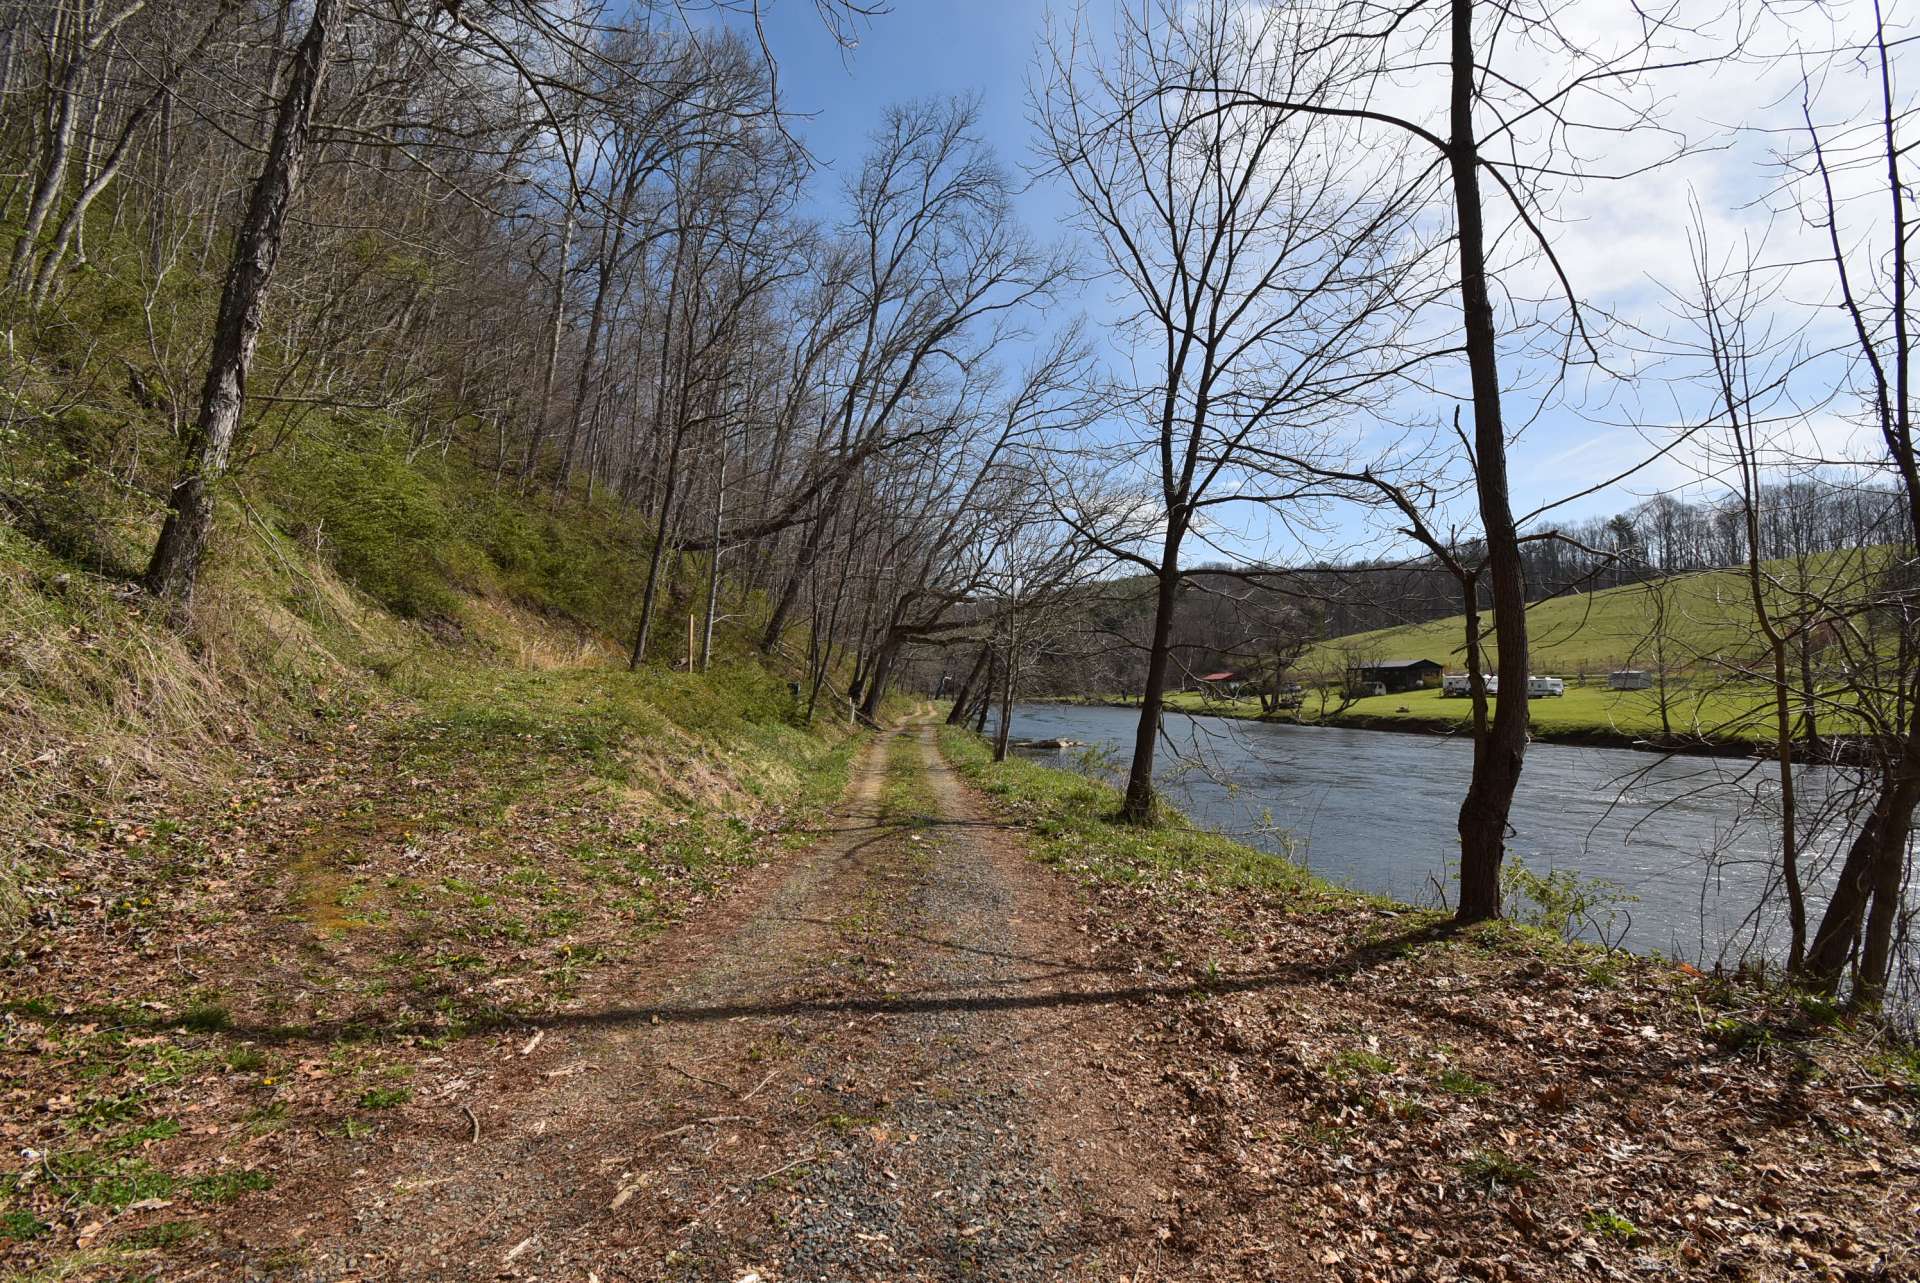 You will enjoy the peaceful drive along the  New River  through North River Estates to reach this NC Mountain homesite.